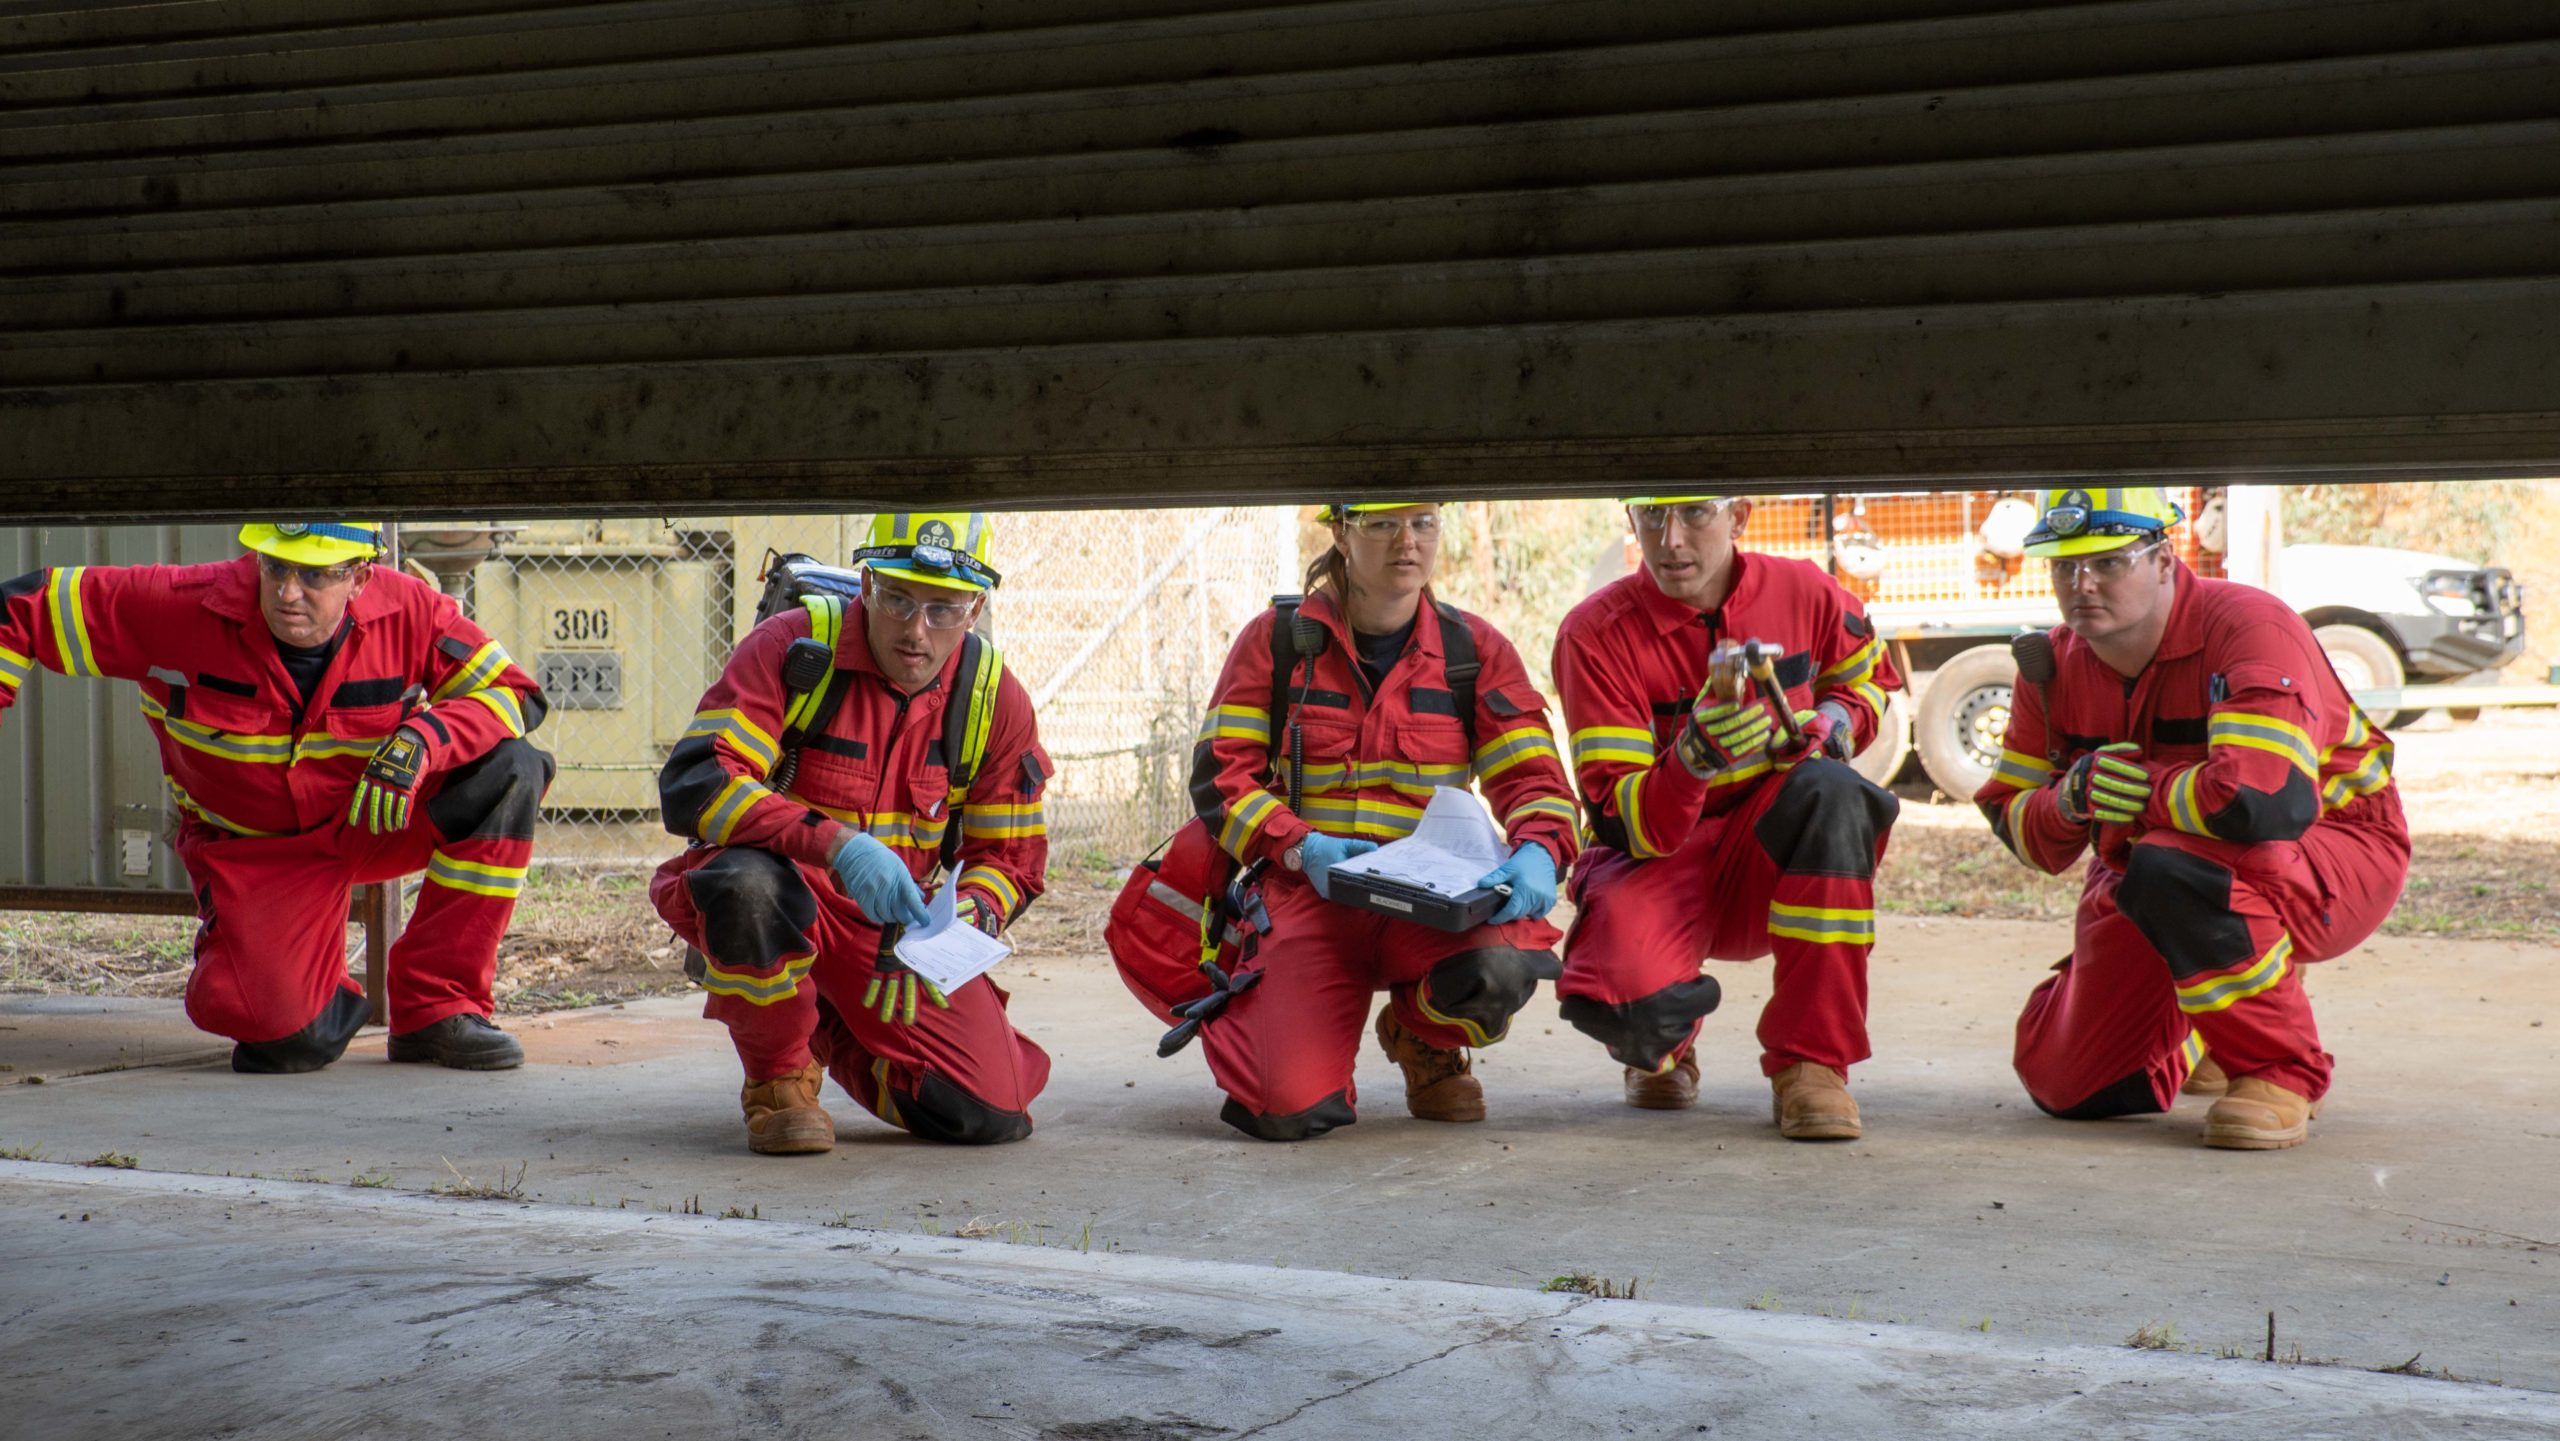 SIMEC’s Iron Ore Emergency Response Team prove they’re up to any challenge